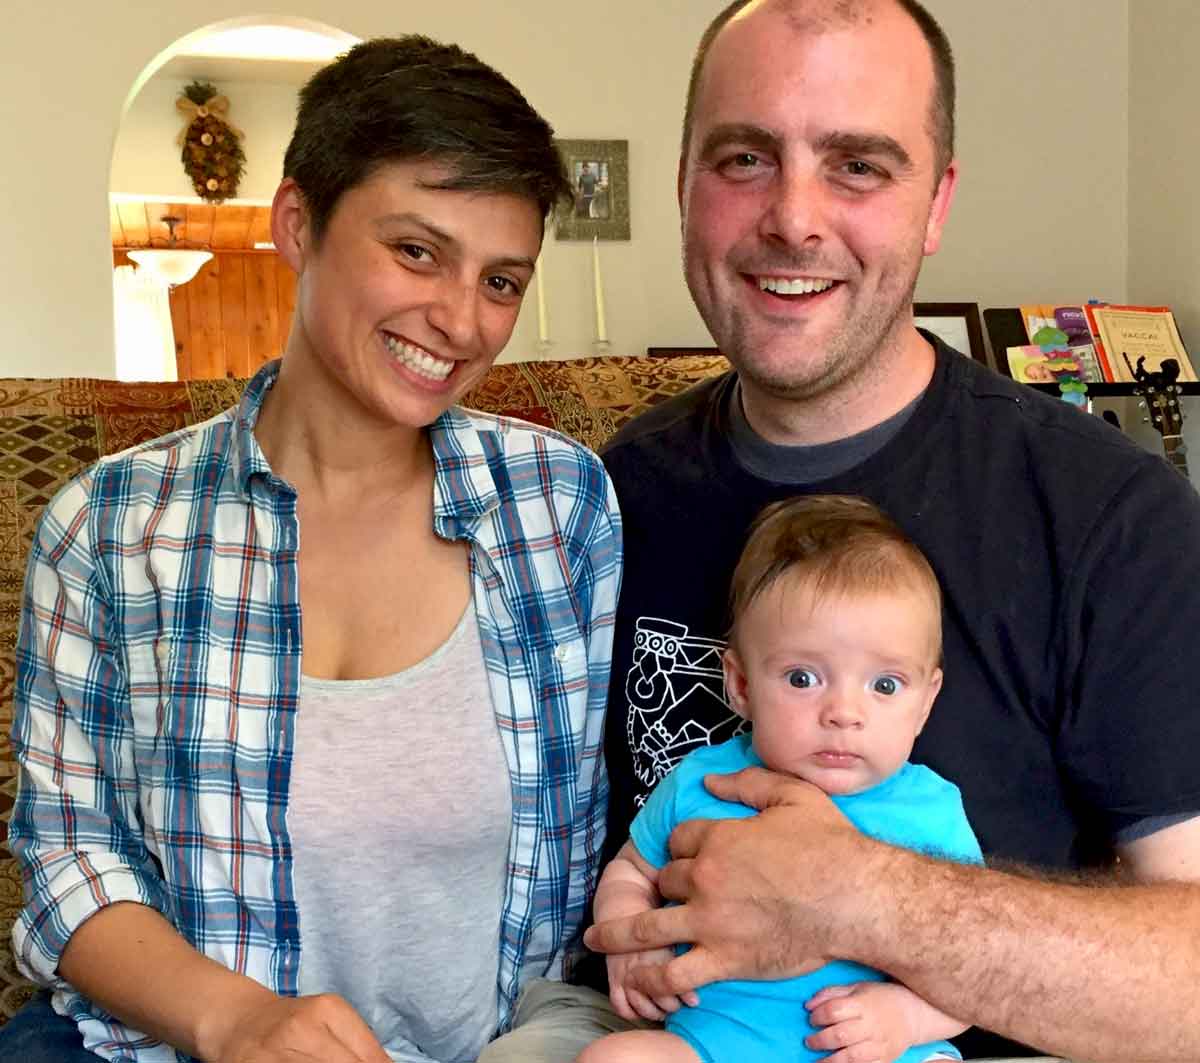 A new happy family, brought together by the OA&FS adoption process